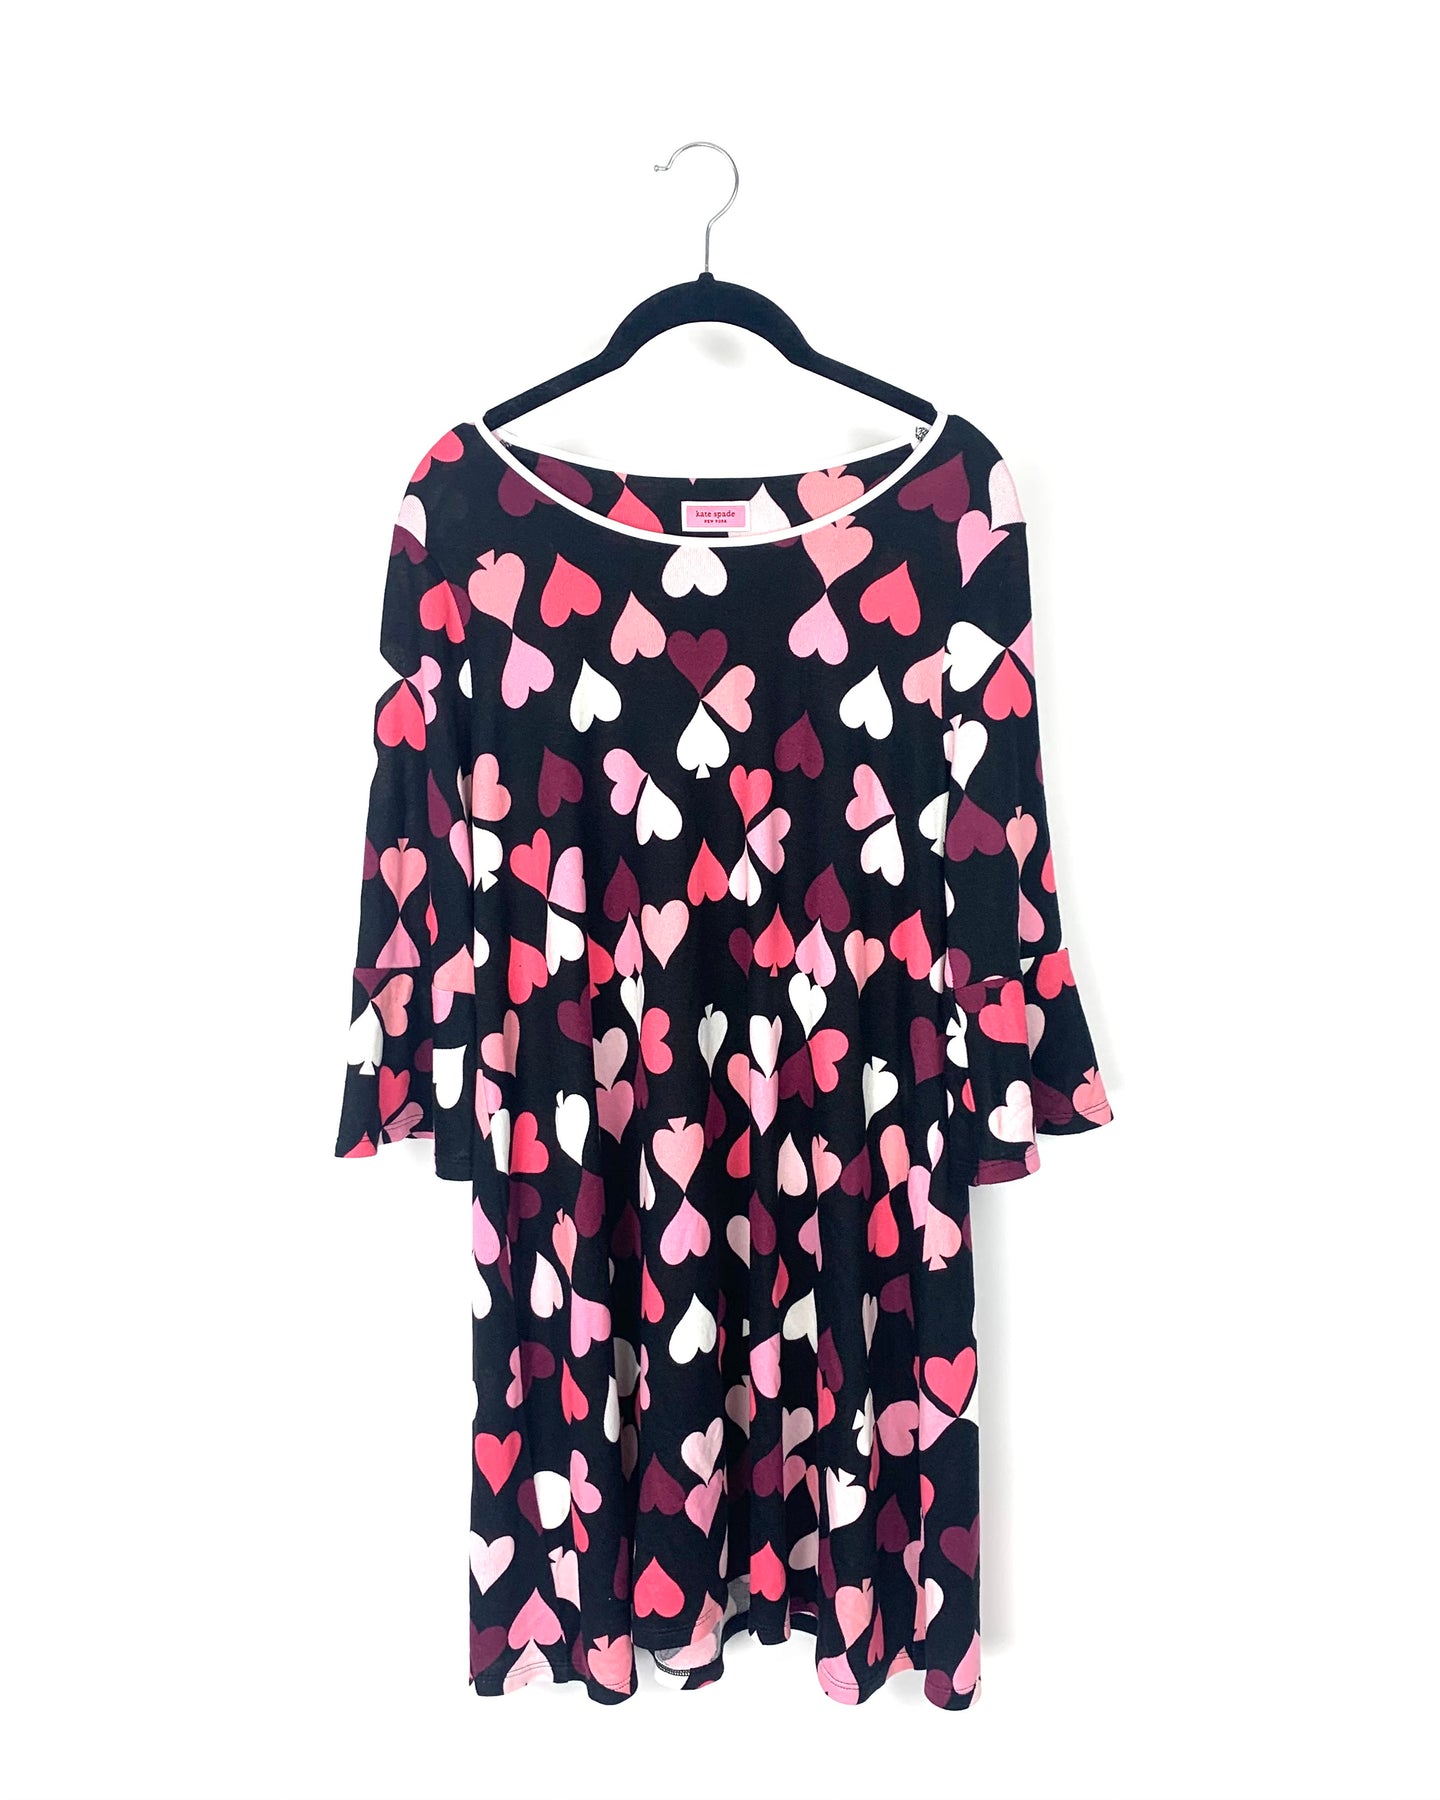 Kate Spade Black Heart Print Nightgown - Small – The Fashion Foundation